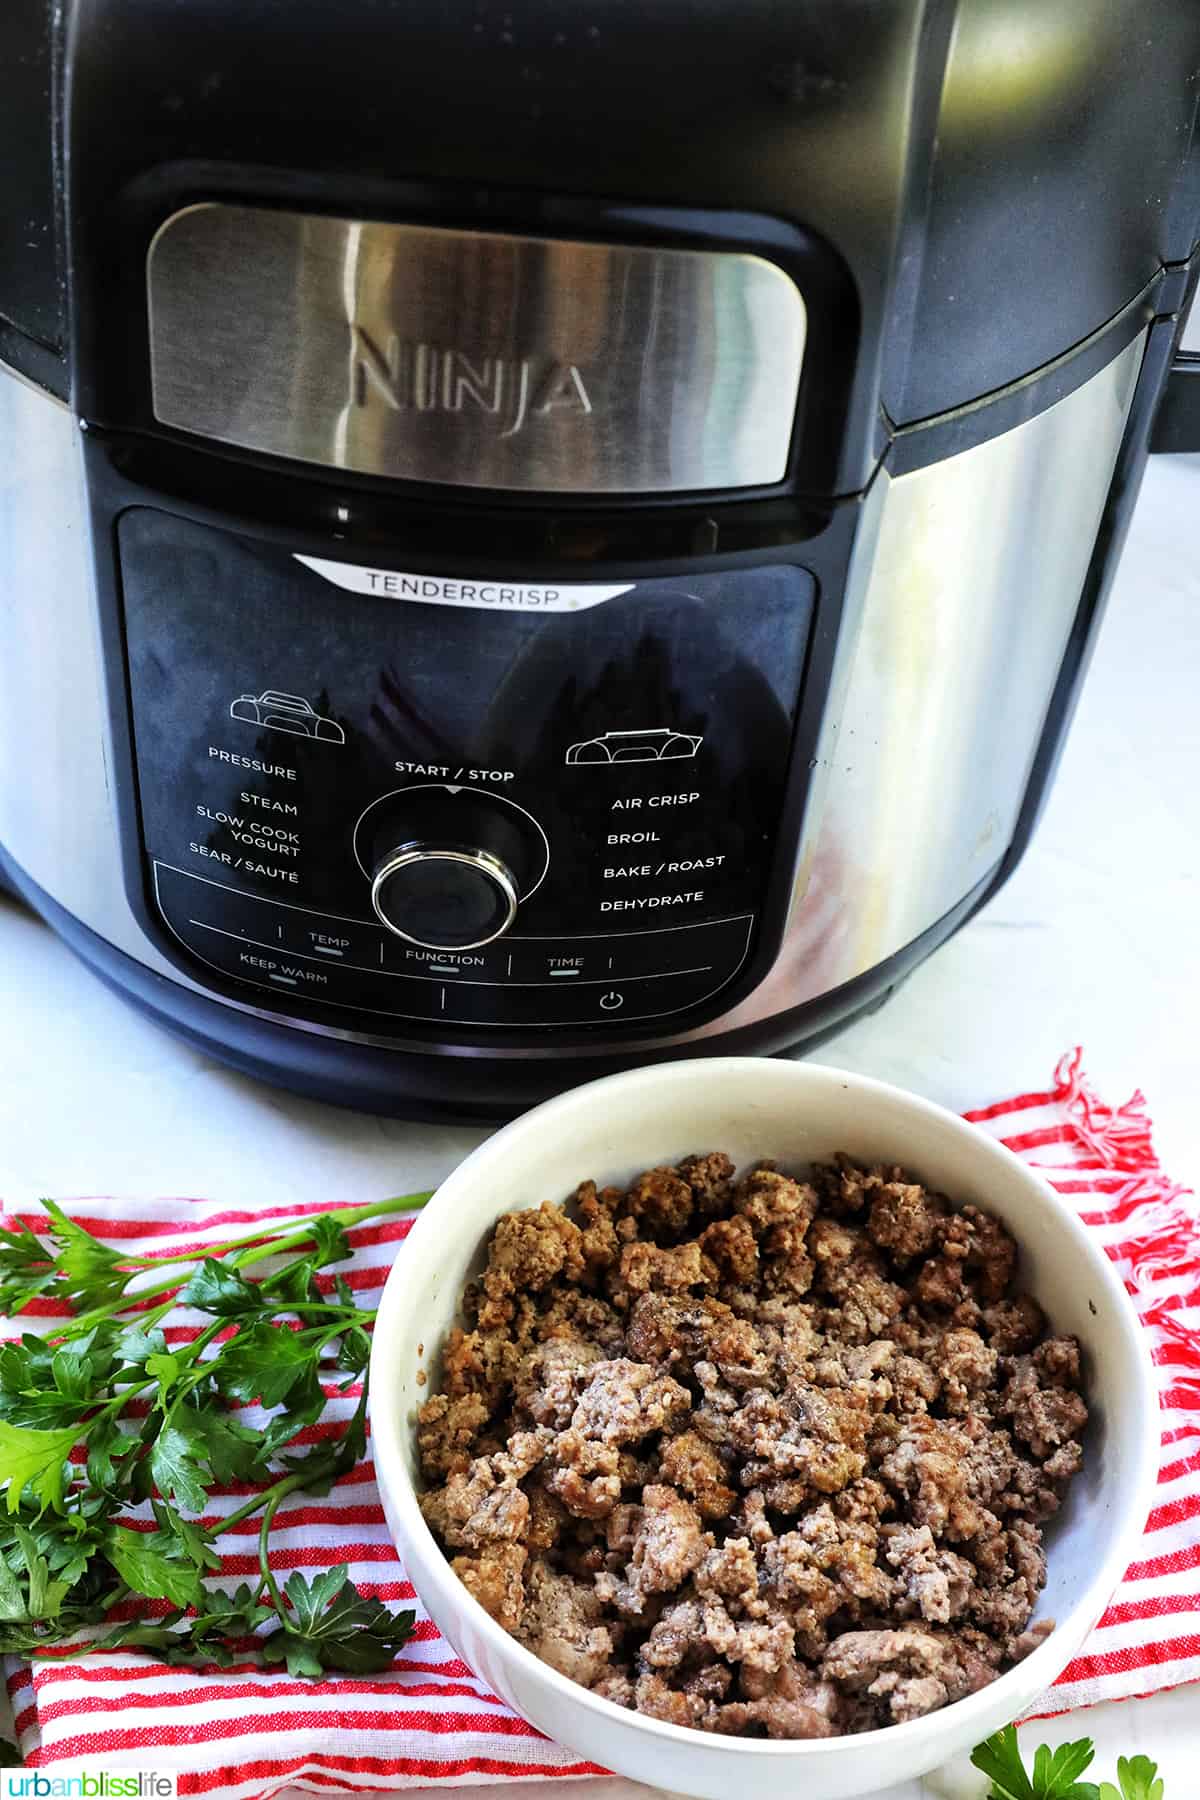 air fryer and ground beef in a white bowl with parsley sprigs around it and a red and white striped towel.